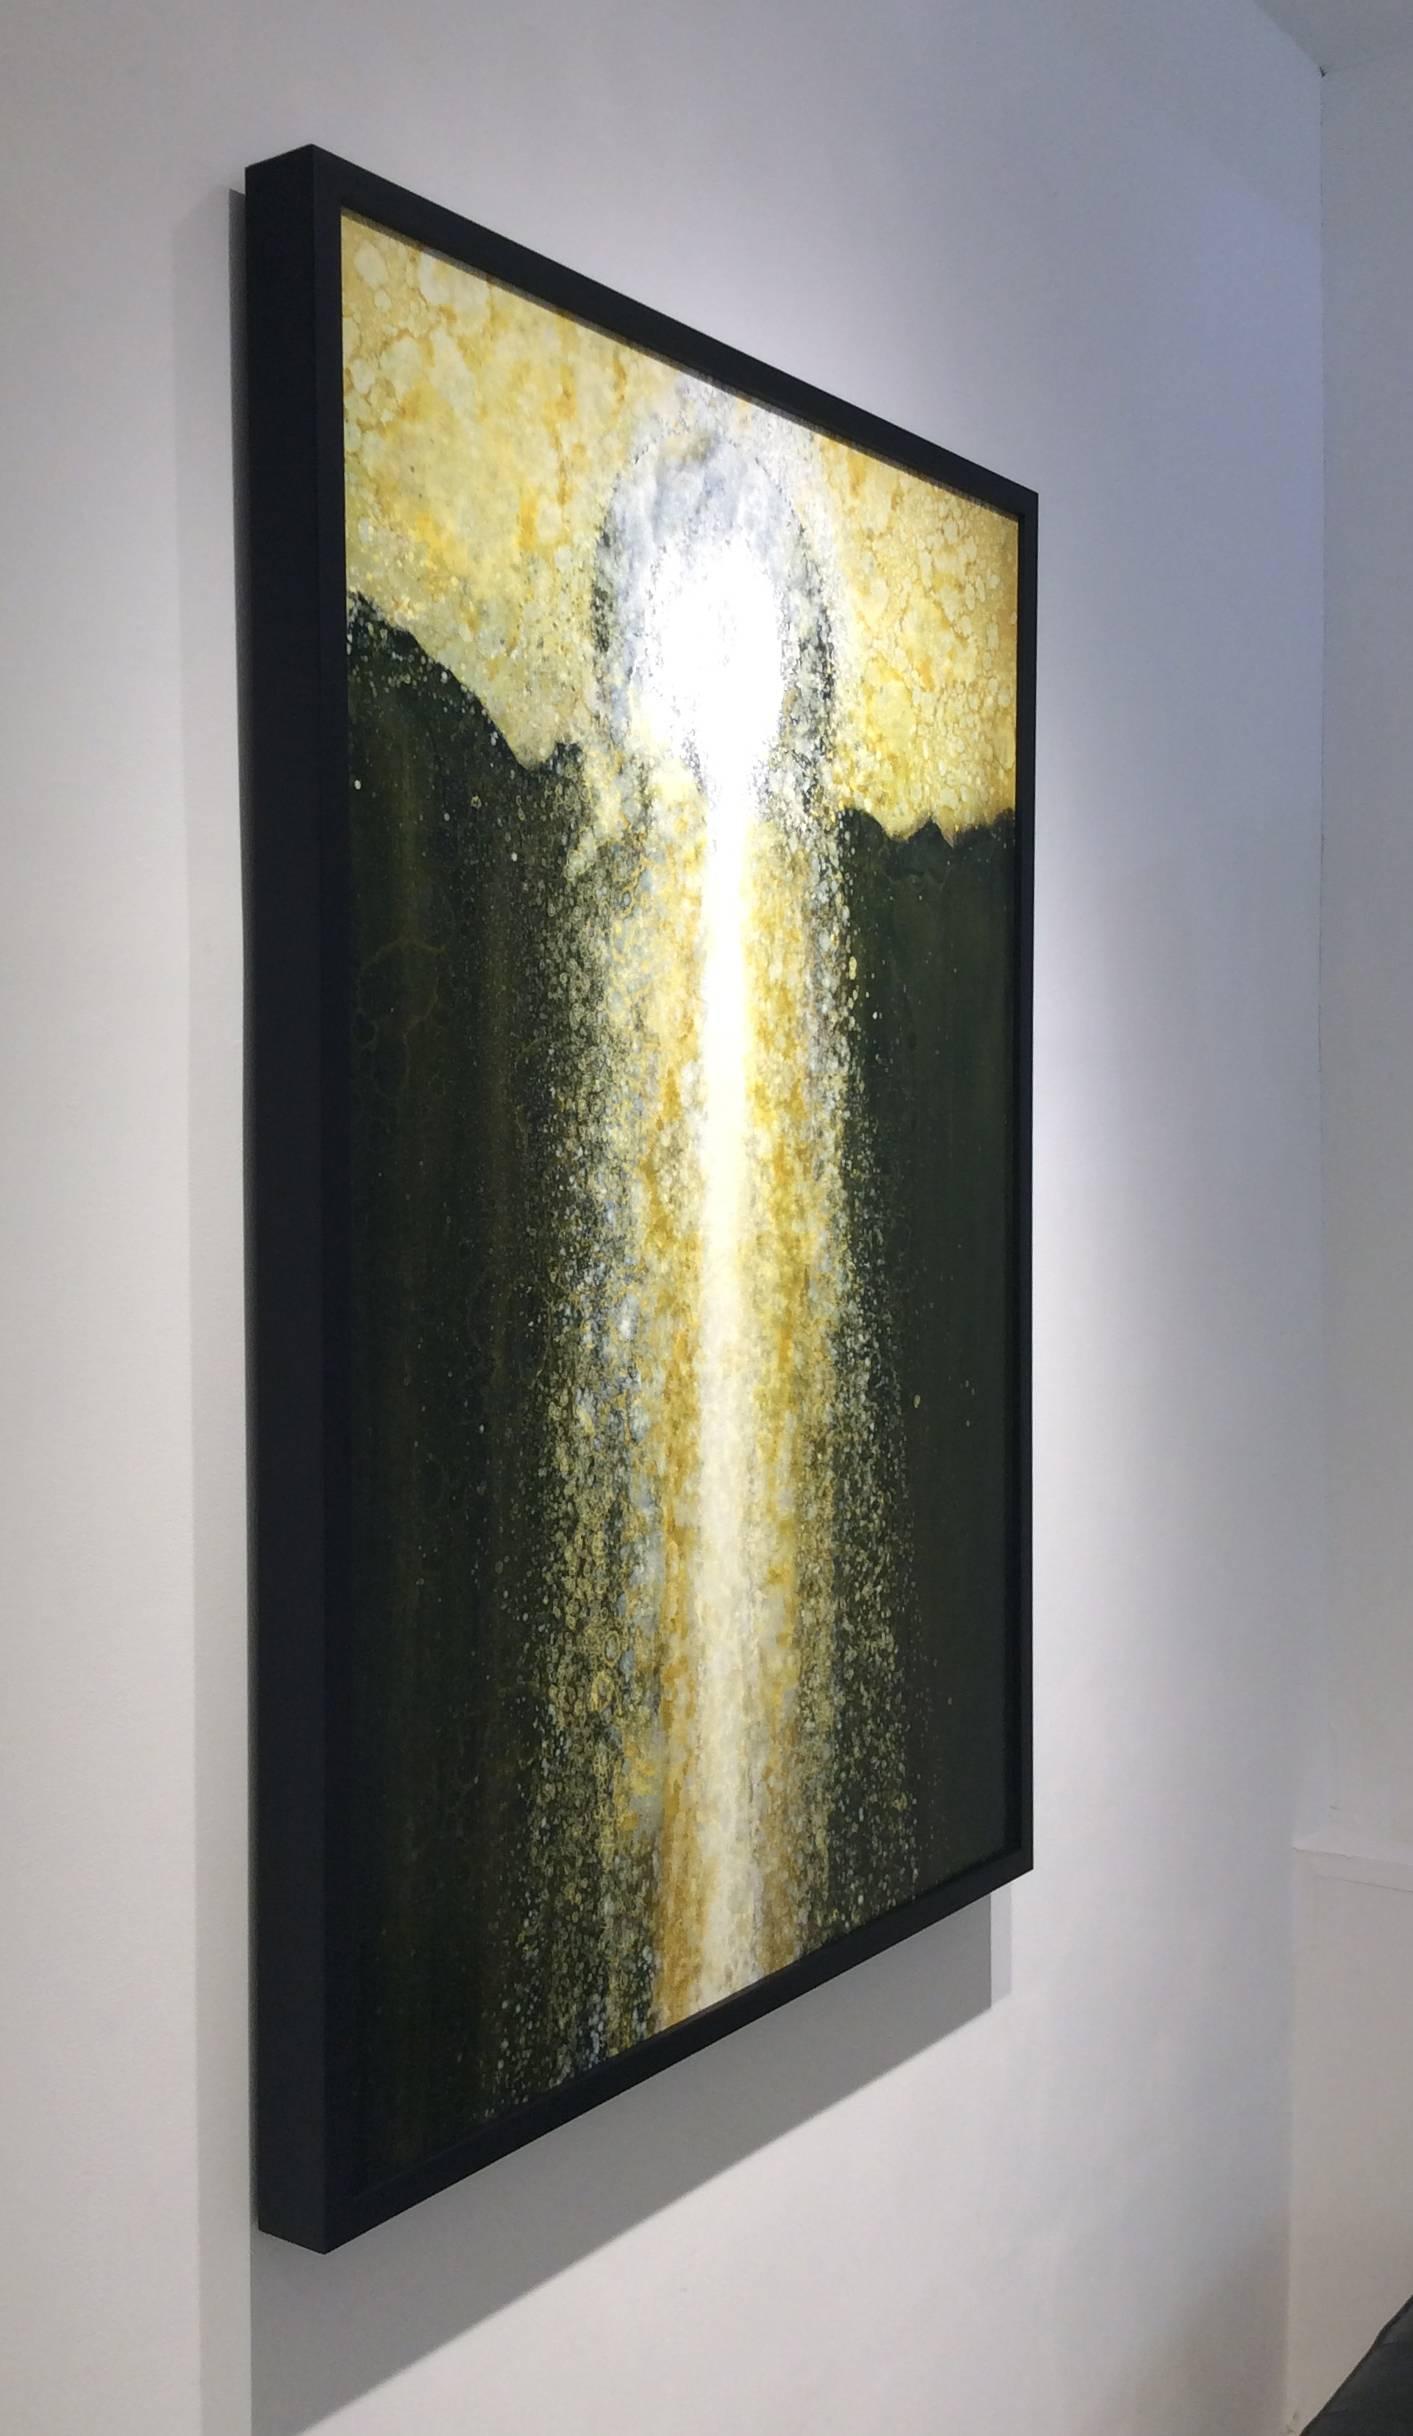 Vertical gestural abstract painting on canvas in golden and pale yellow, dark brown, and white
Oil, alkyd and mineral spirits on canvas framed in a simple black moulding. 
48 x 36 inches unframed, 49.5 x 37.5 inches framed

Inspired by stones,